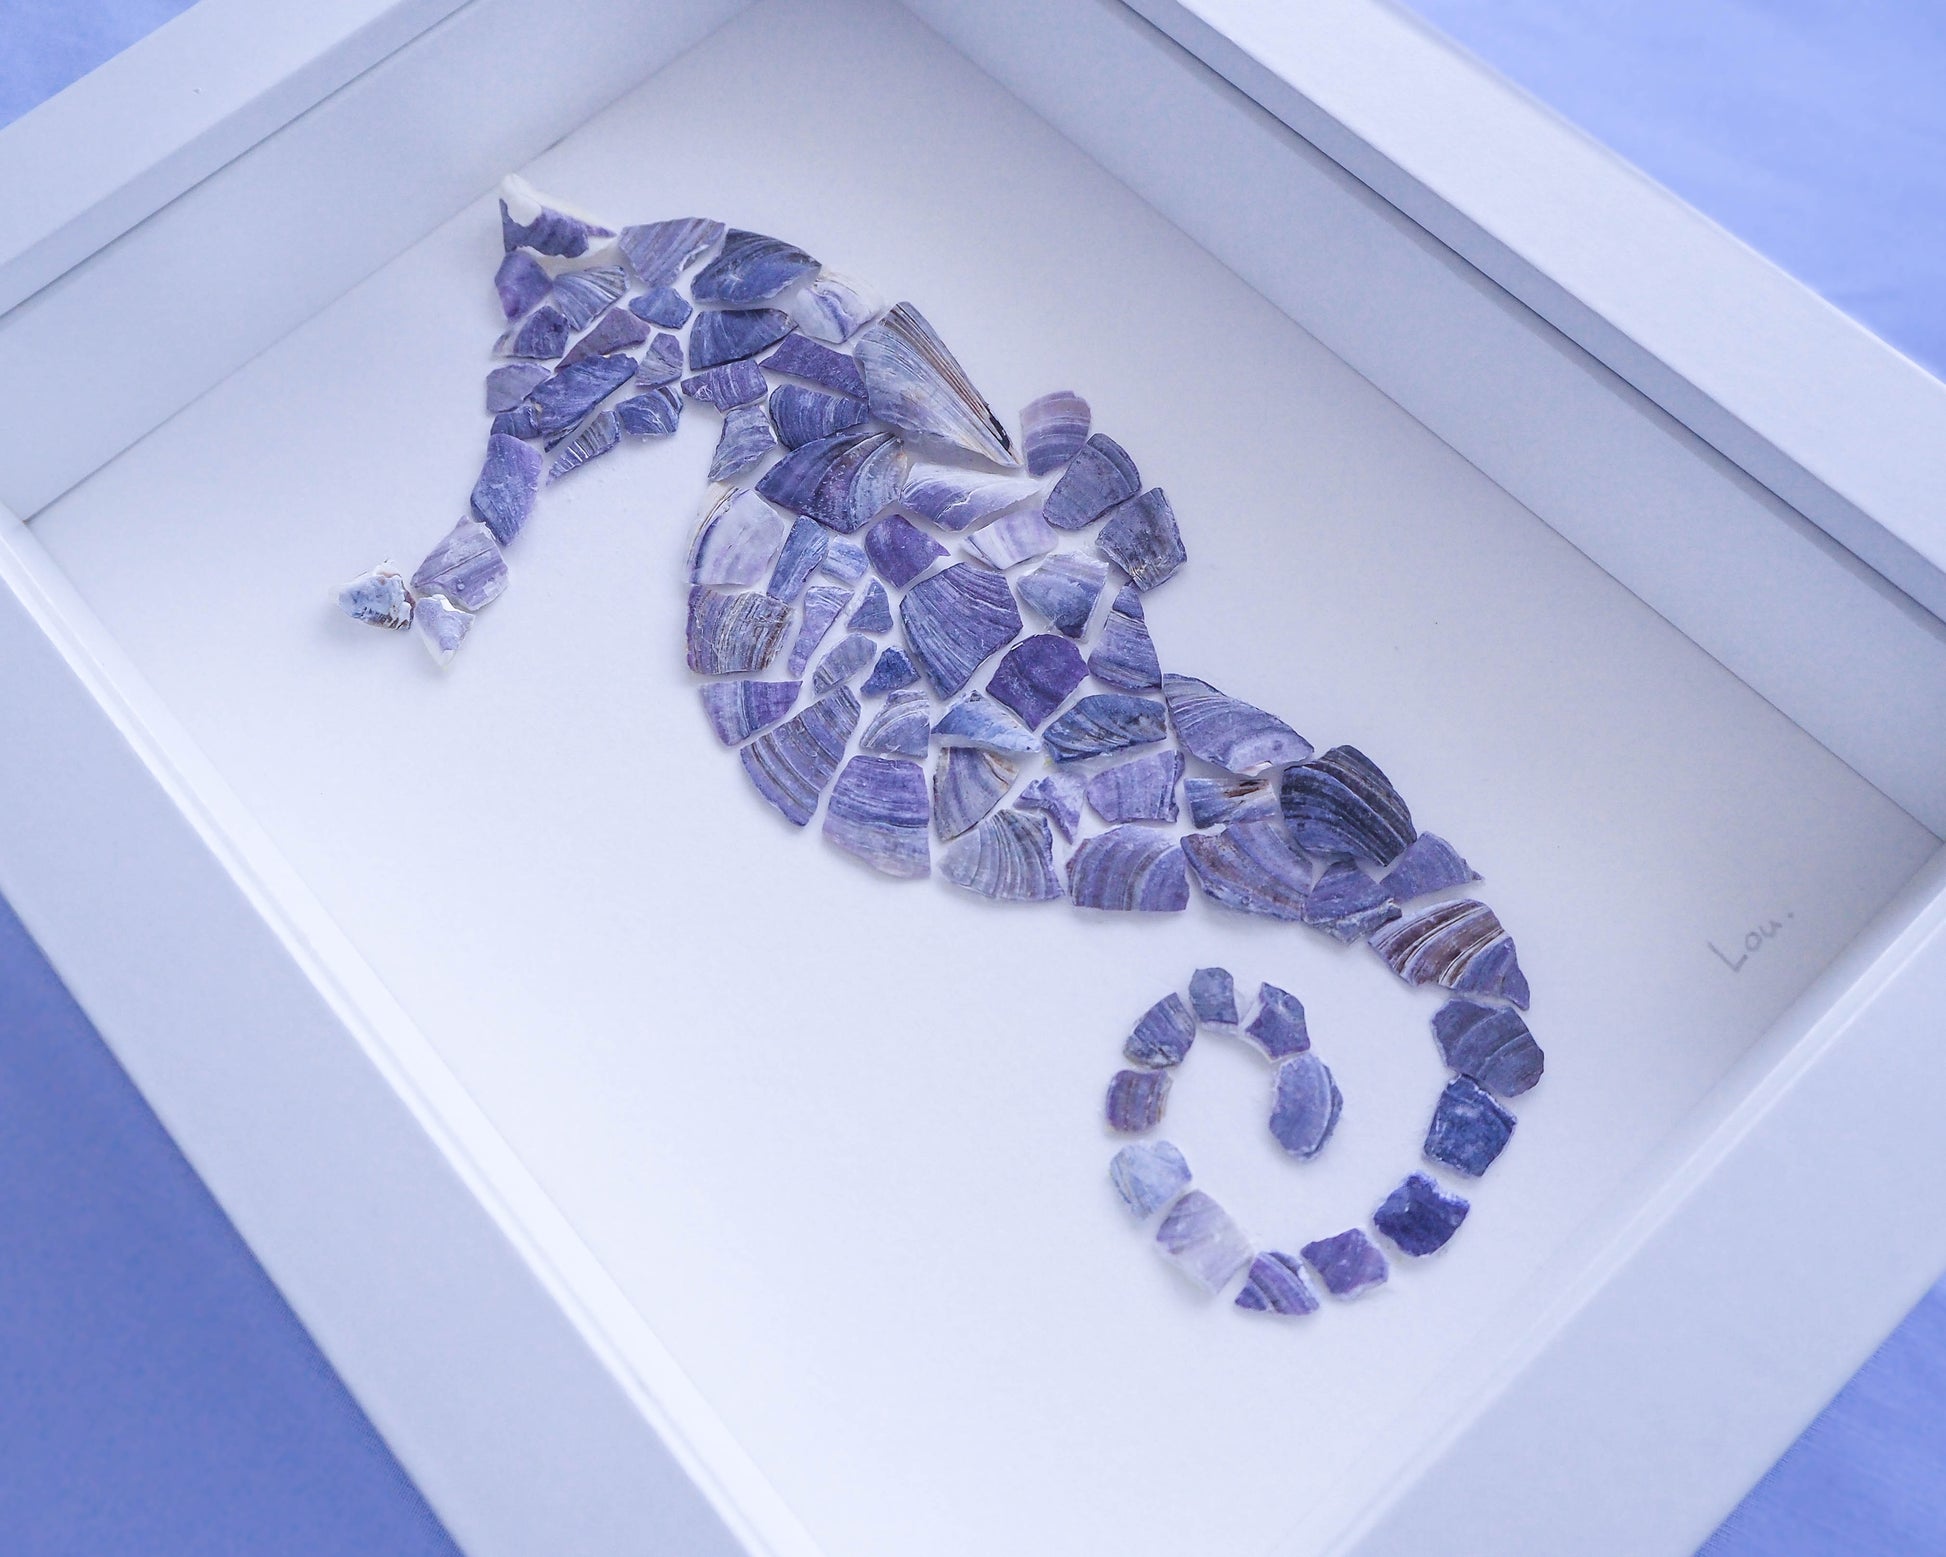 Left view of artwork in the shape of a seahorse made of mussel shells by Seabylou - Sea by Lou